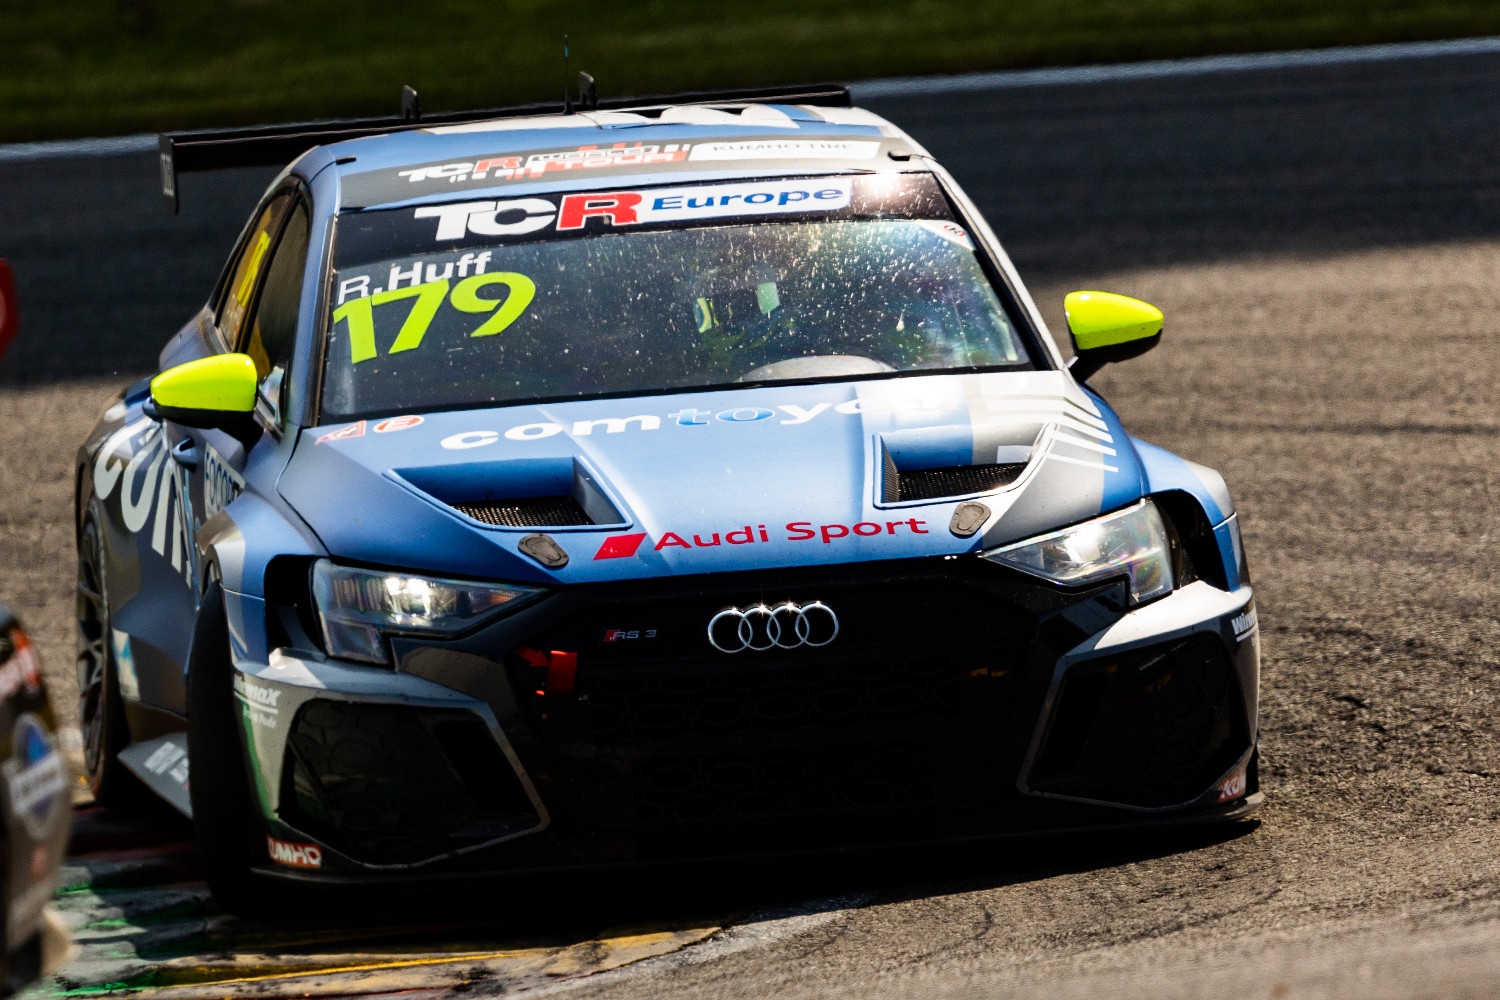 Rob Huff explains car fault that led to Race 2 struggles at Spa ...